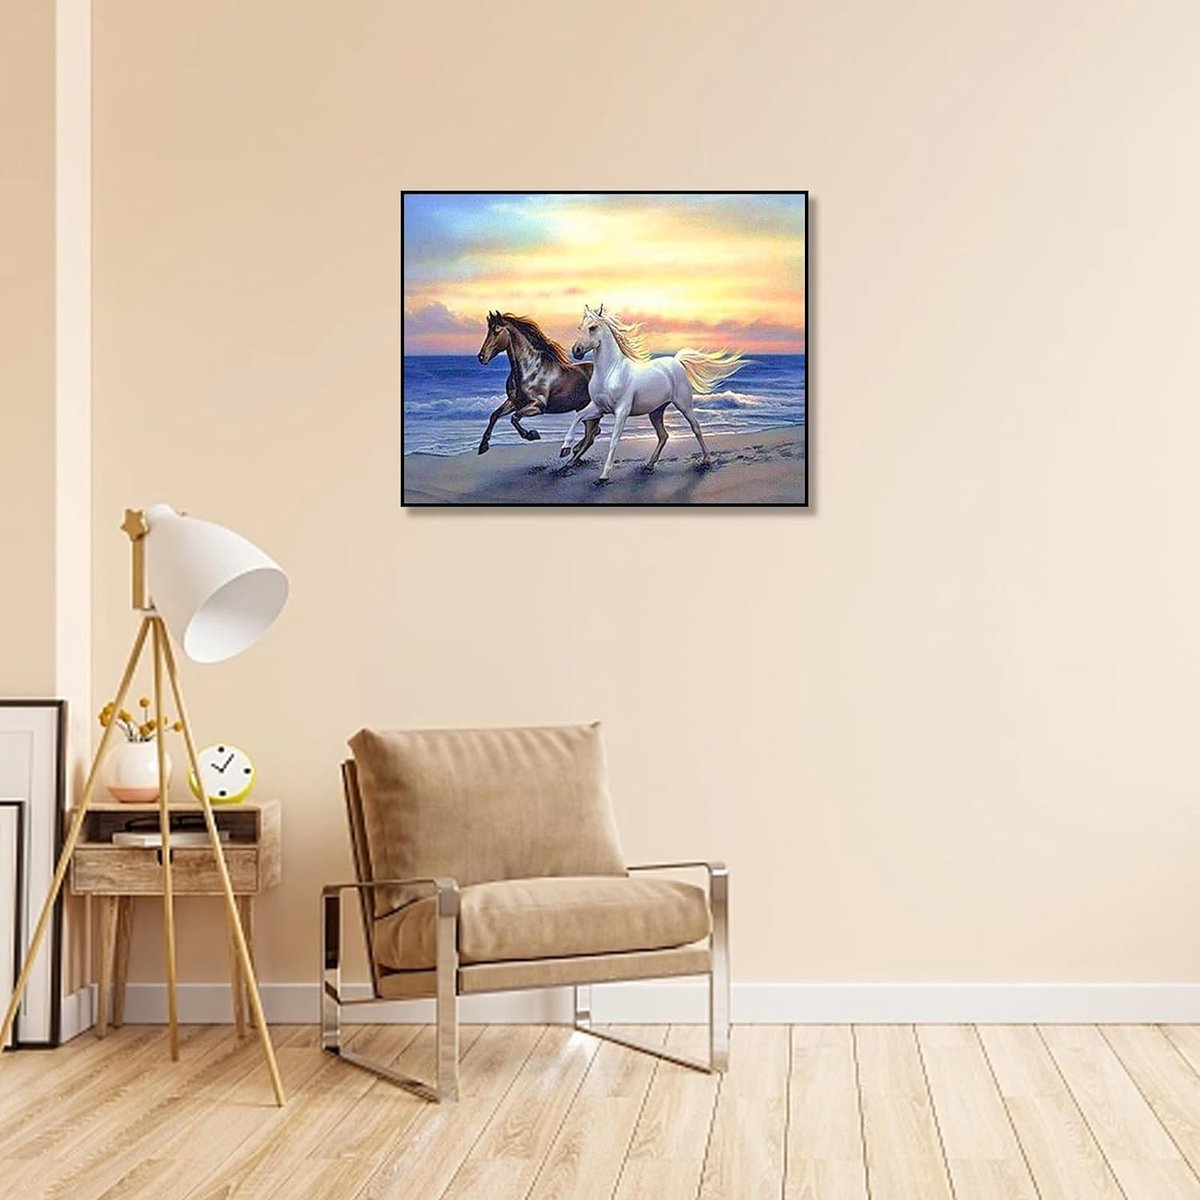 Diamond Painting Paard / Horse Diamond Painting set for adults and children 50x40cm